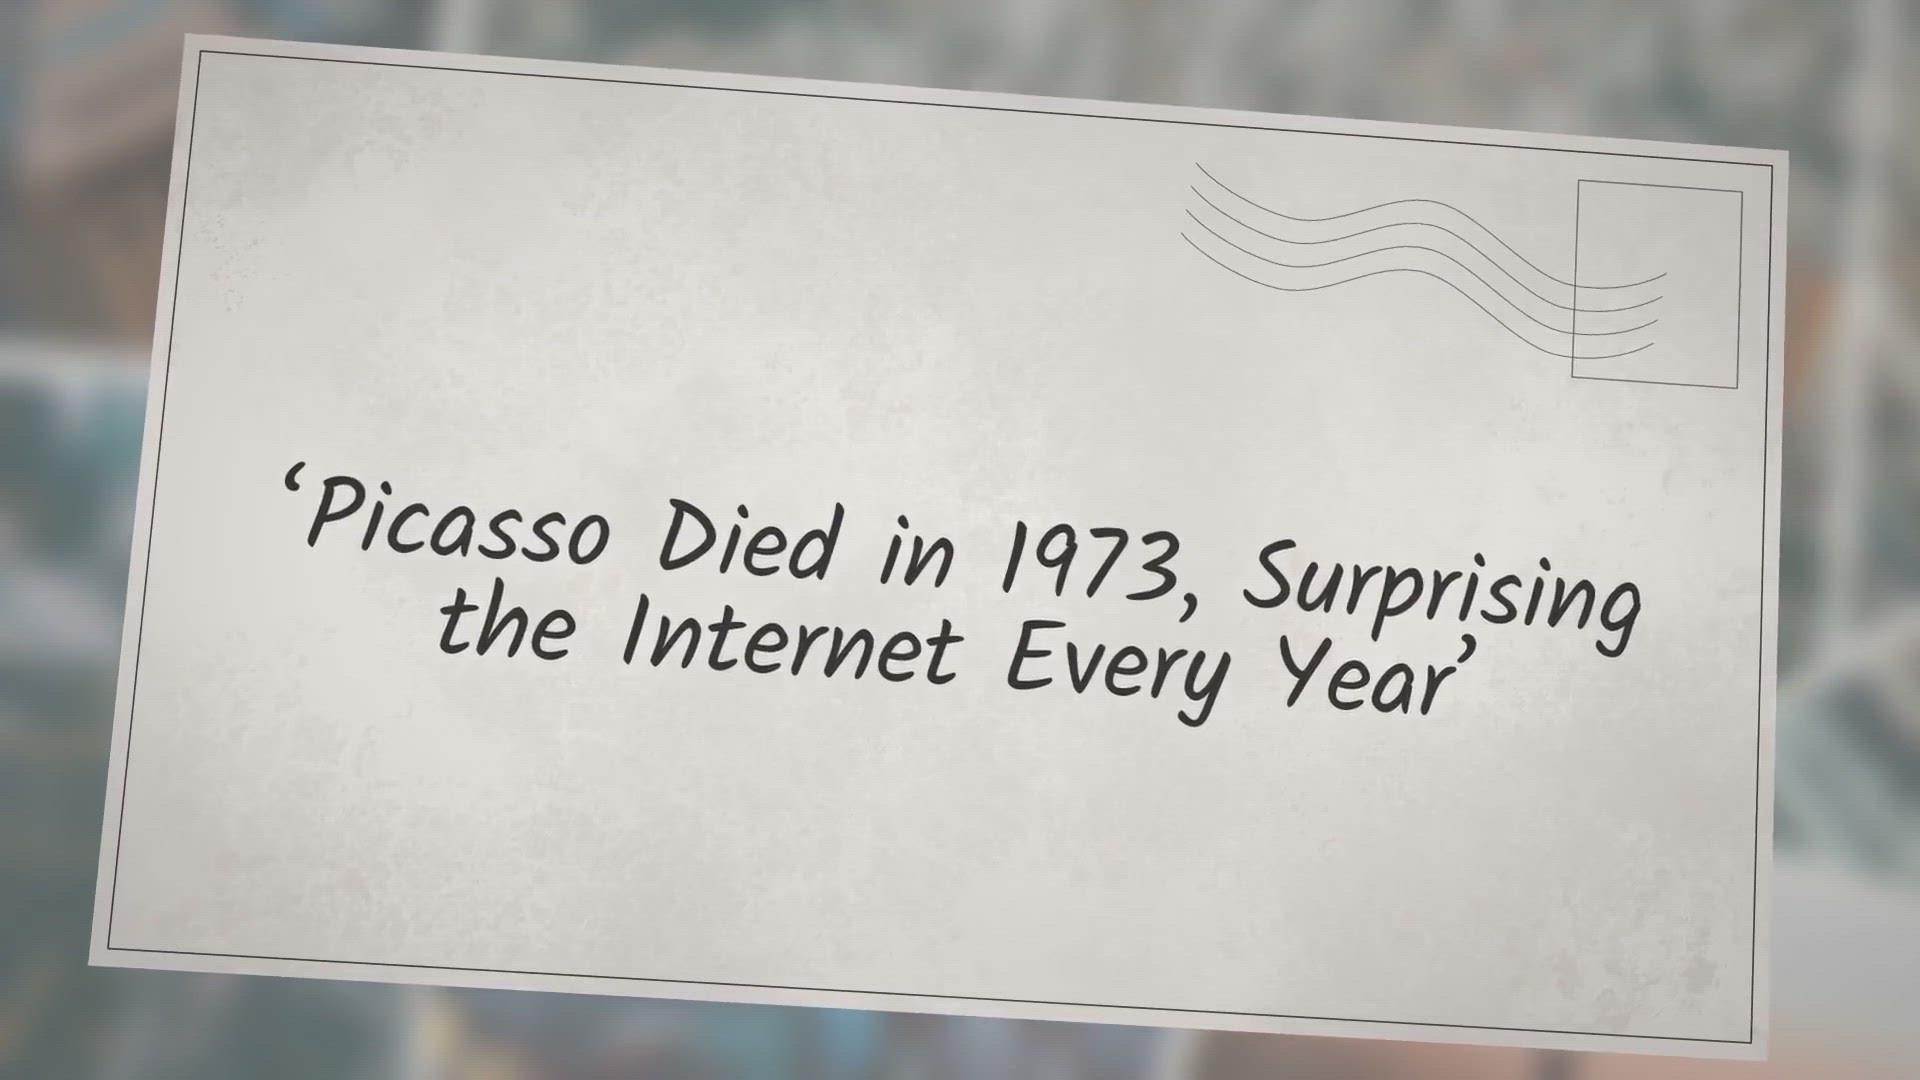 'Video thumbnail for ‘Picasso Died in 1973, Surprising the Internet Every Year’'